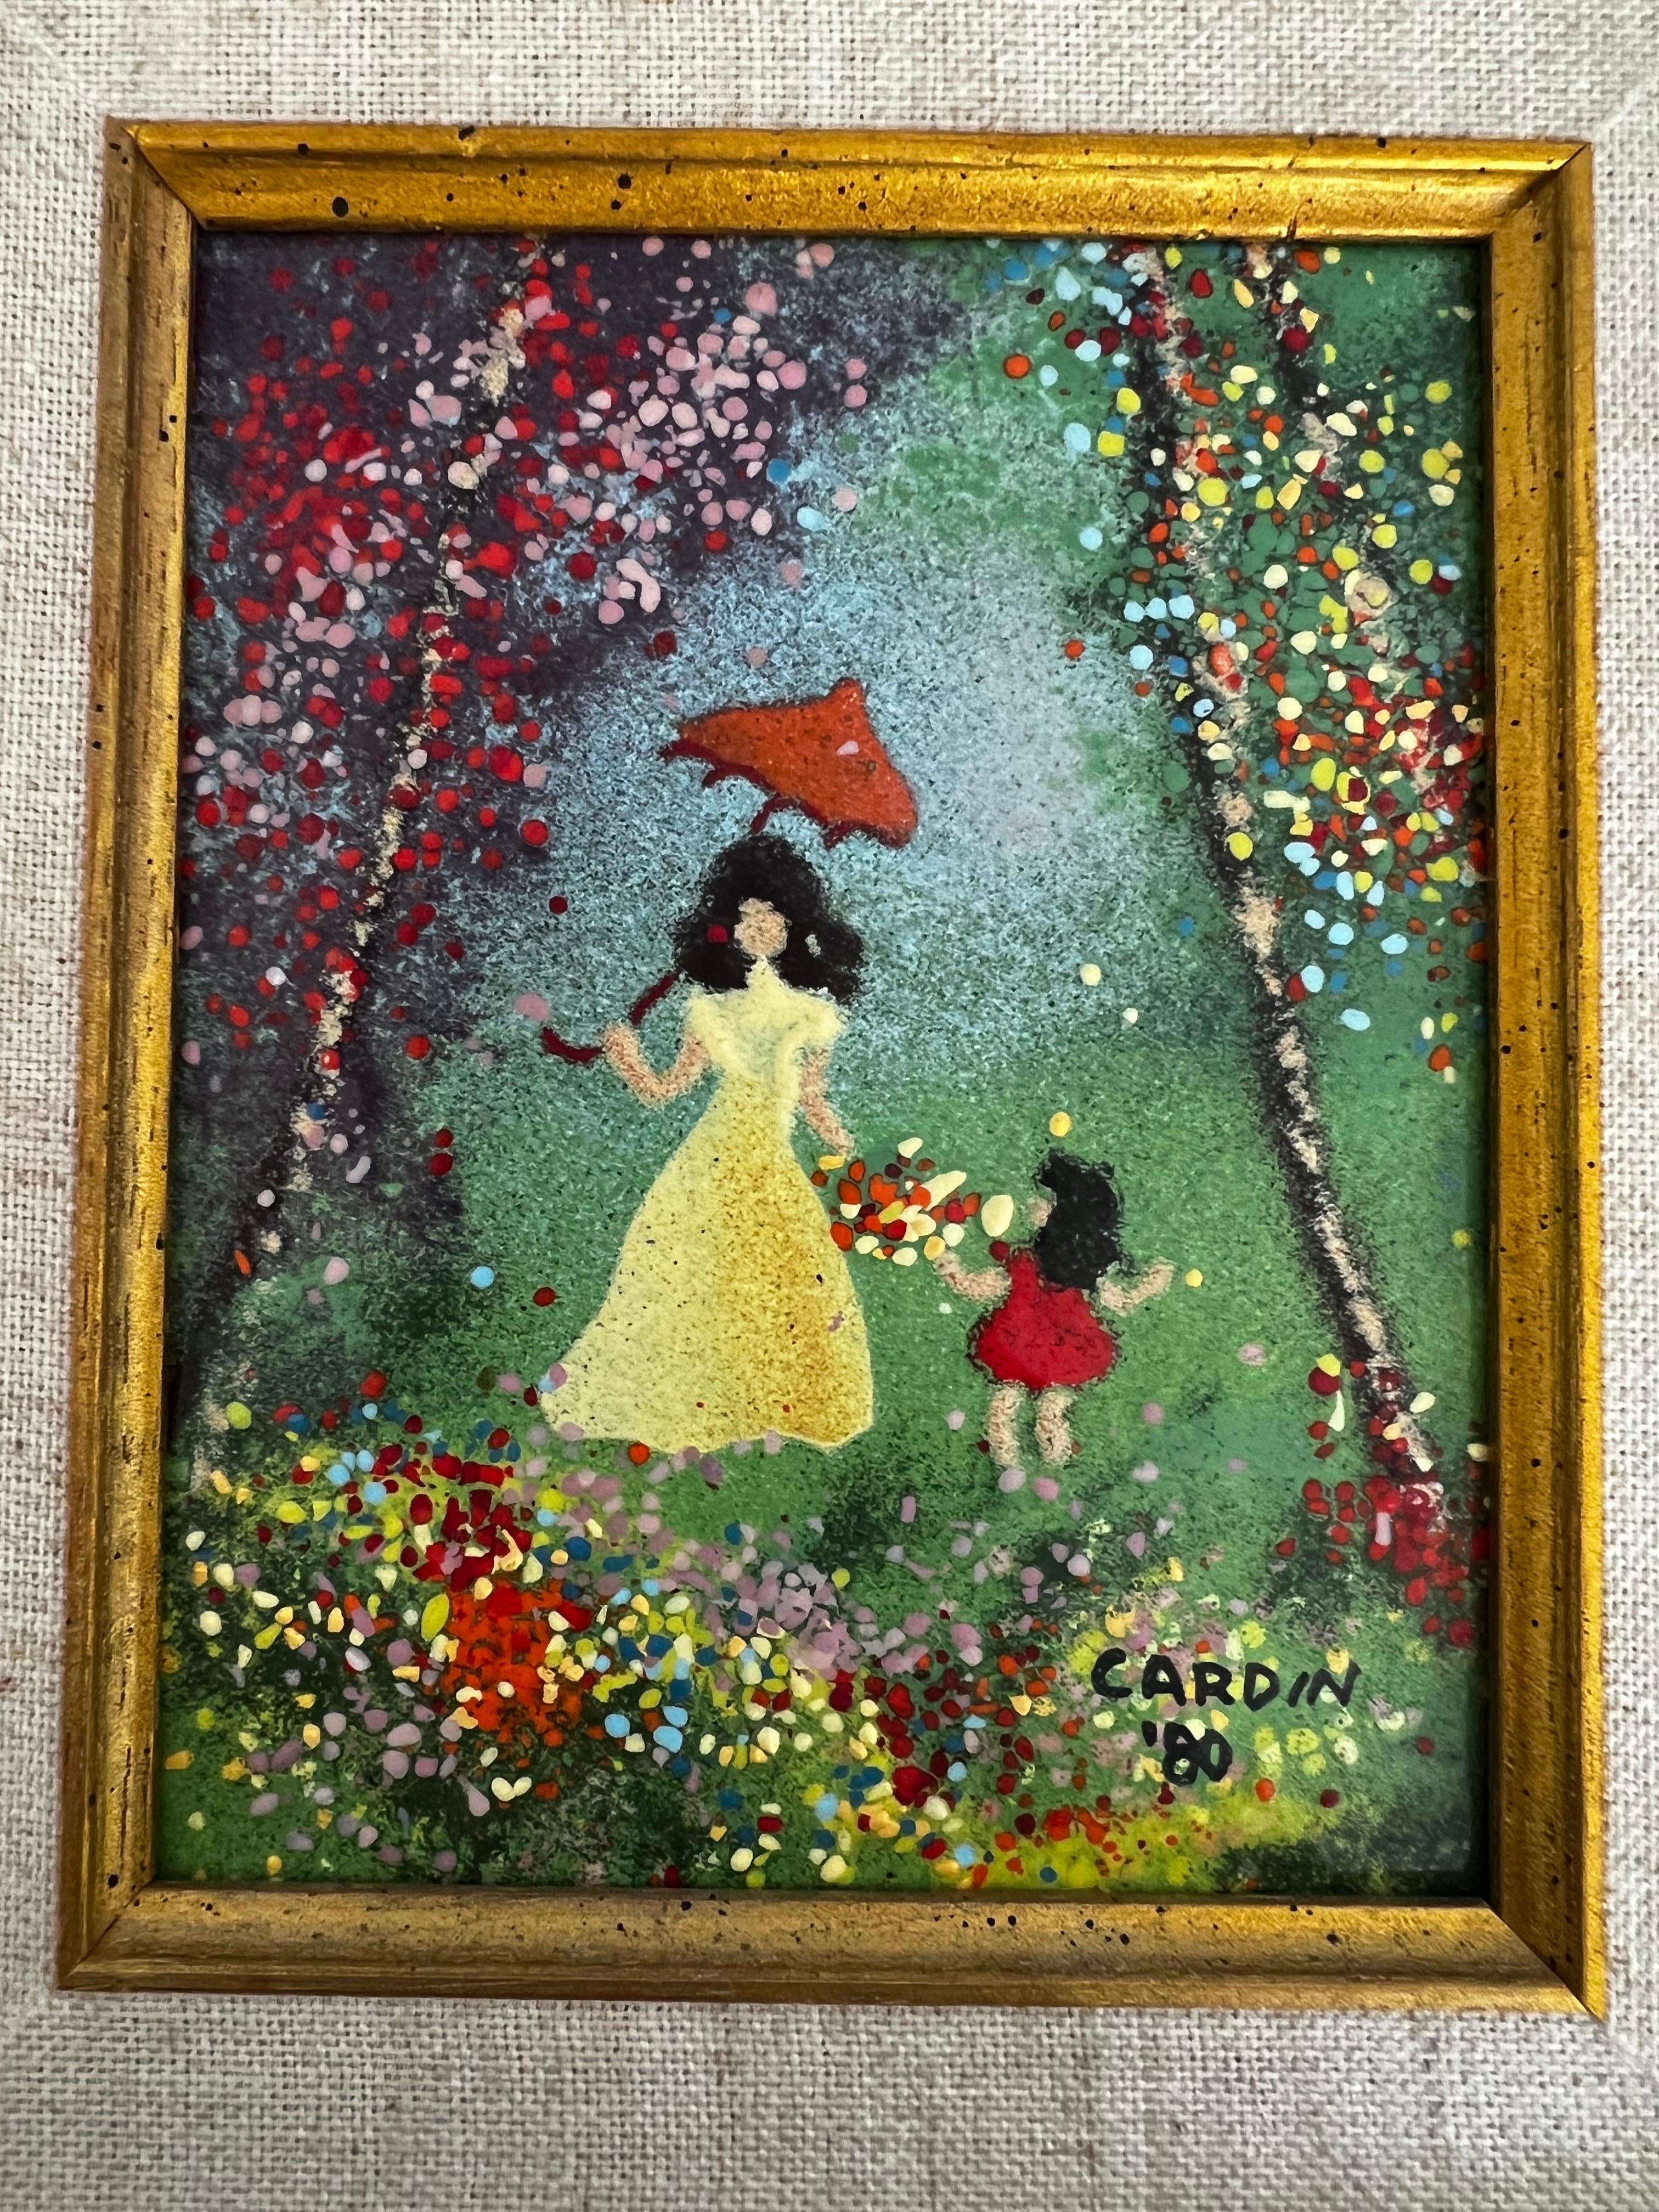 Hand-Painted Pair of Vintage Enamel Framed Art  by Louis Cardin For Sale